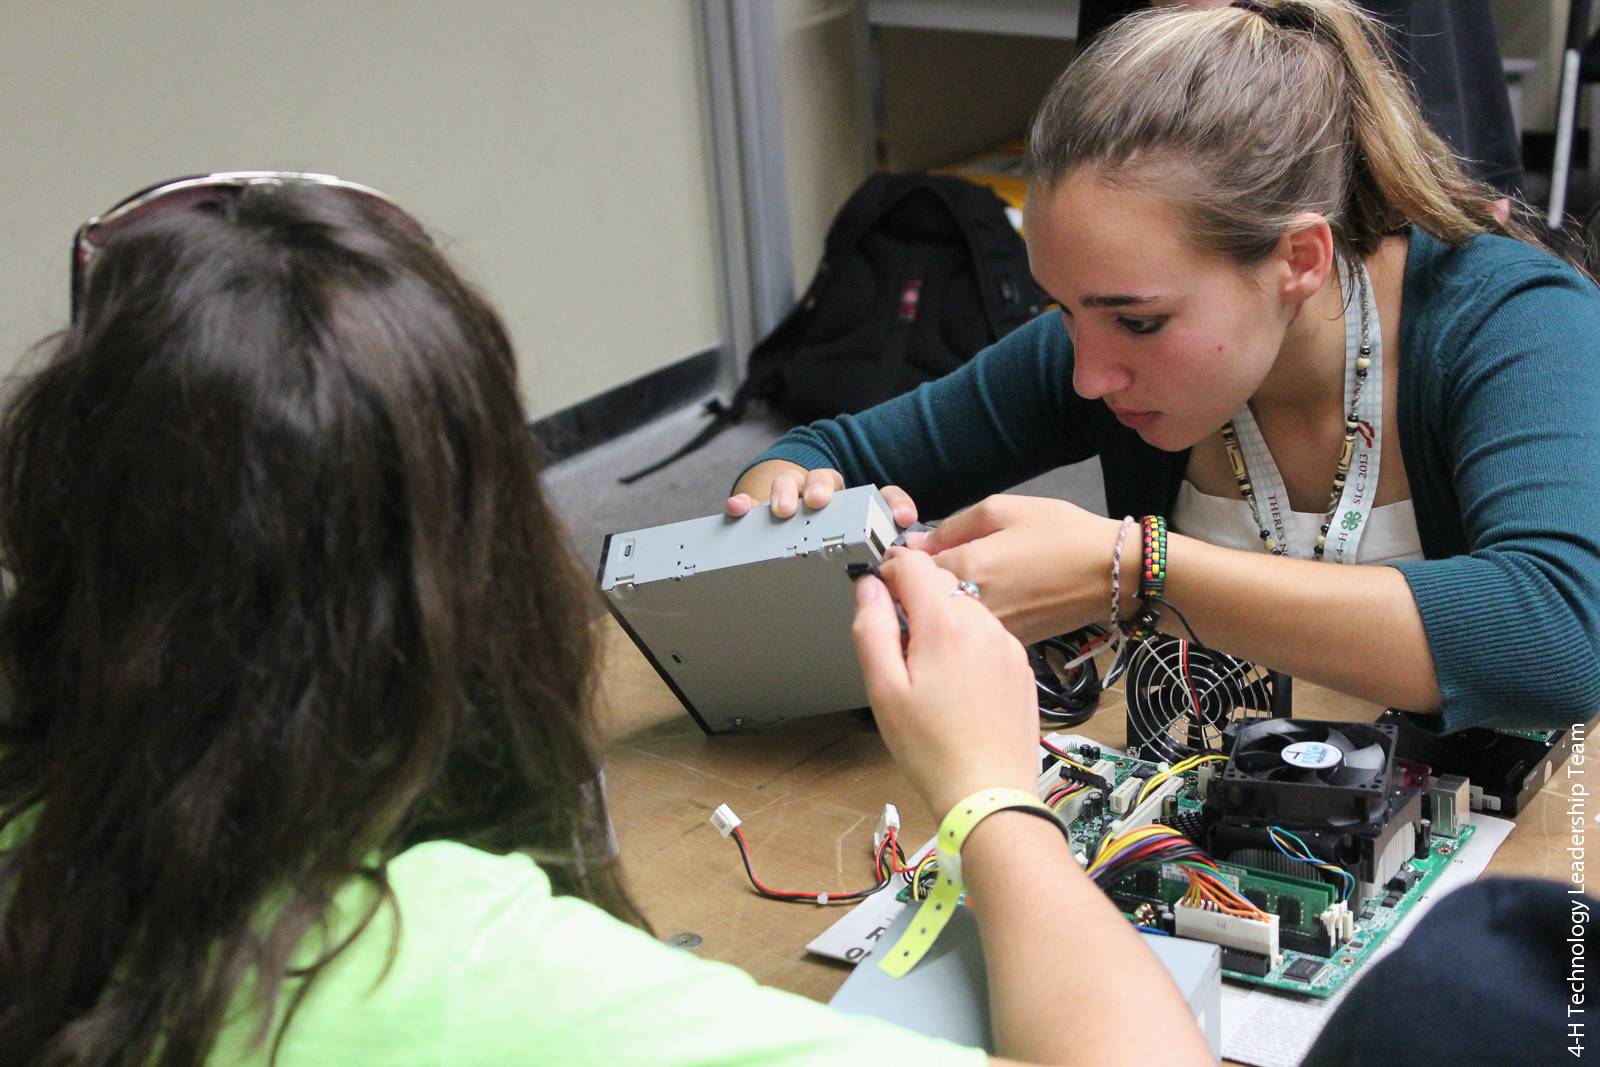 Nonformal education programs such as 4-H have become recognized as a vital link in addressing scientific literacy. Above, students participate in a computer hardware workshop at the California 4-H State Leadership Conference.